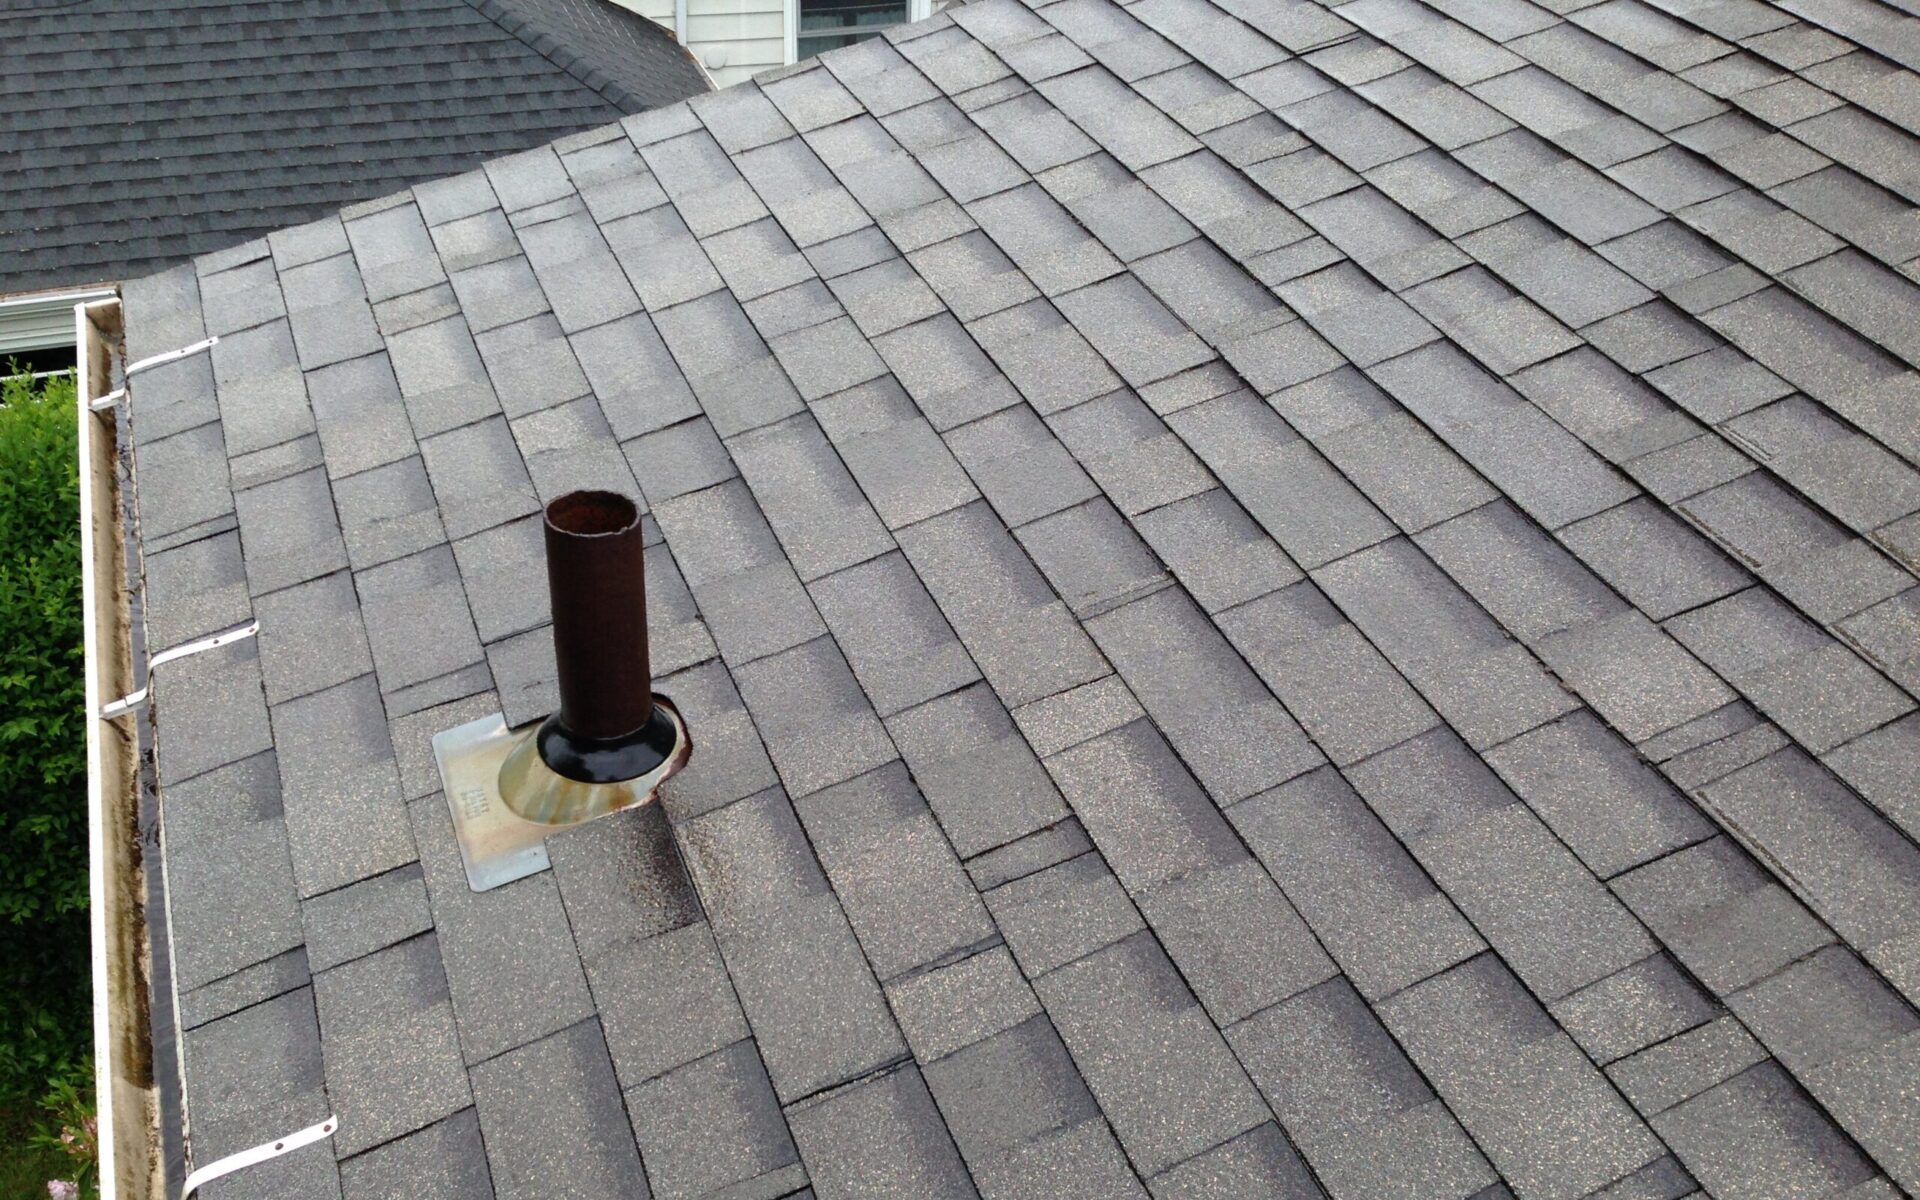 A close-up view of a gray shingled roof with a metal vent pipe, surrounded by a square base, seen under overcast skies.